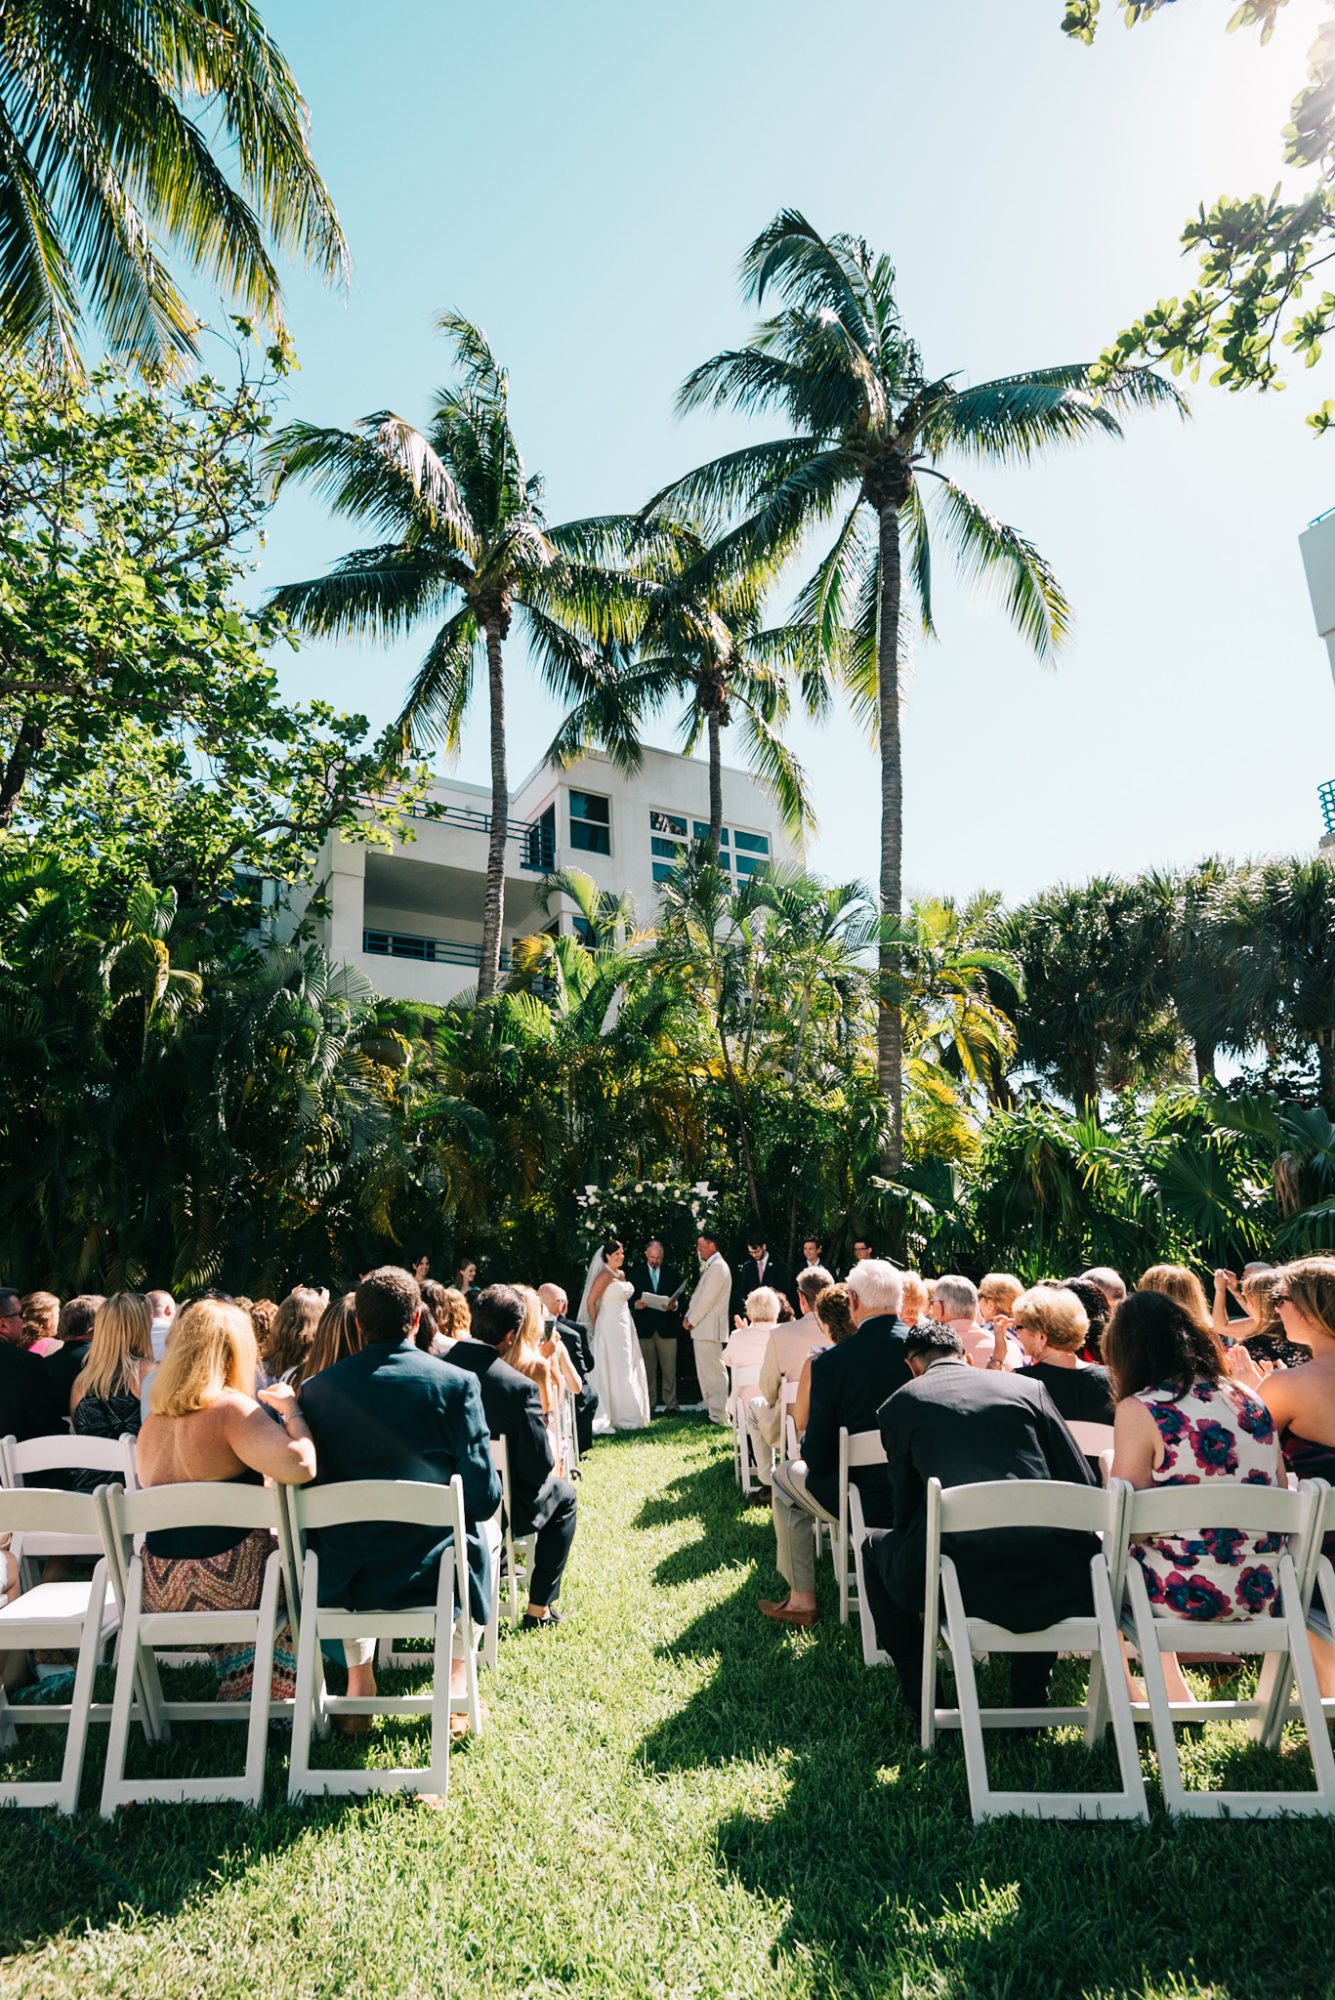 A picturesque outdoor wedding ceremony with palm trees in the background, reminiscent of Truman White House weddings held in Key West.